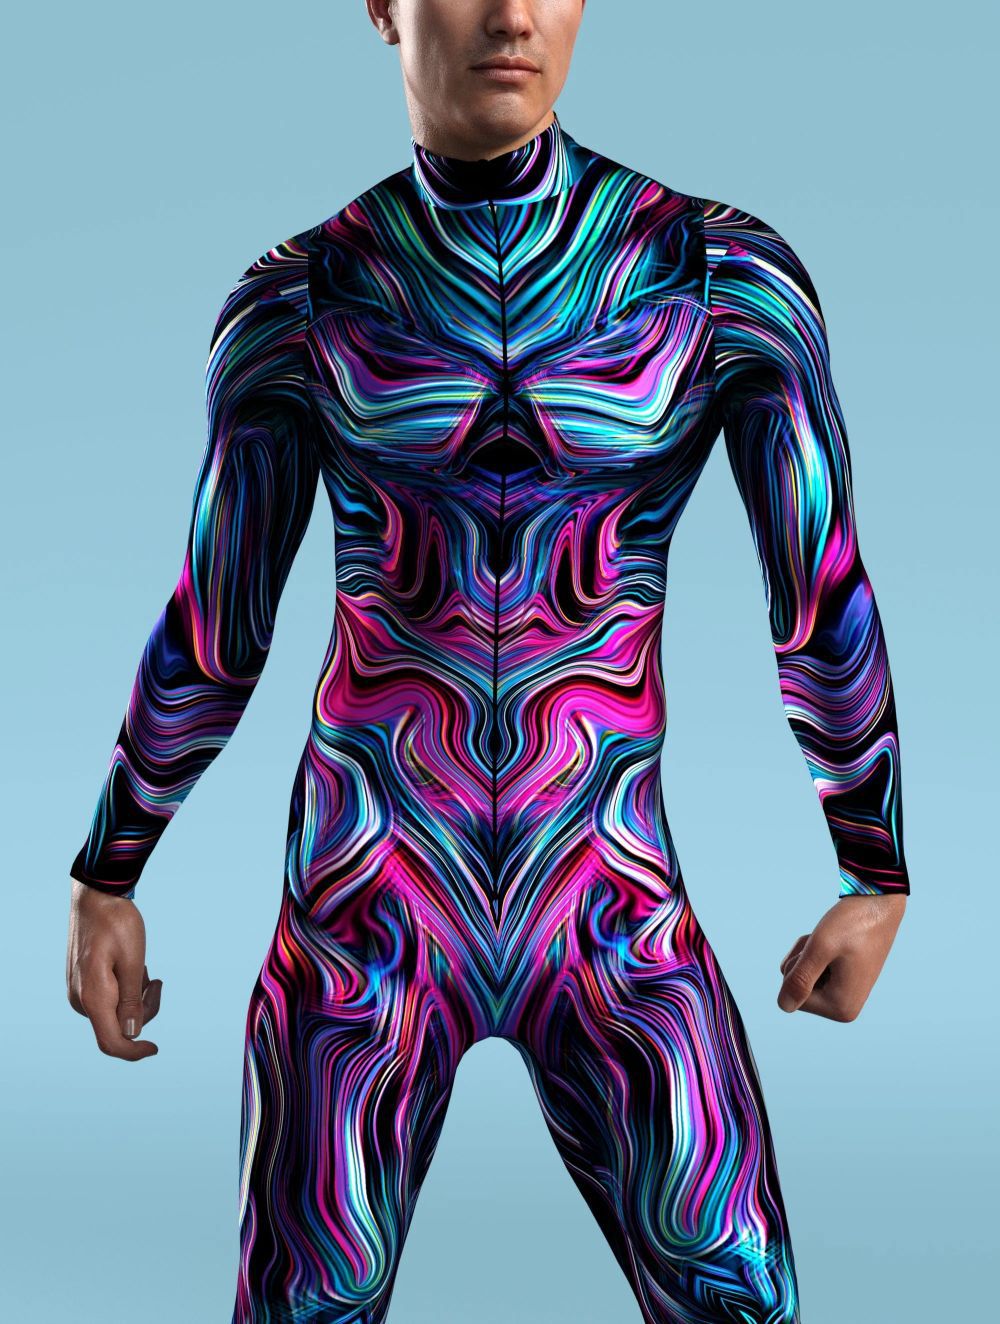 Person wearing the Maramalive™ Halloween Tights 3D Digital Printing Cos One-piece Play Costume featuring a vibrant and abstract swirling pattern in shades of blue, pink, and purple. The background is a solid light blue color.